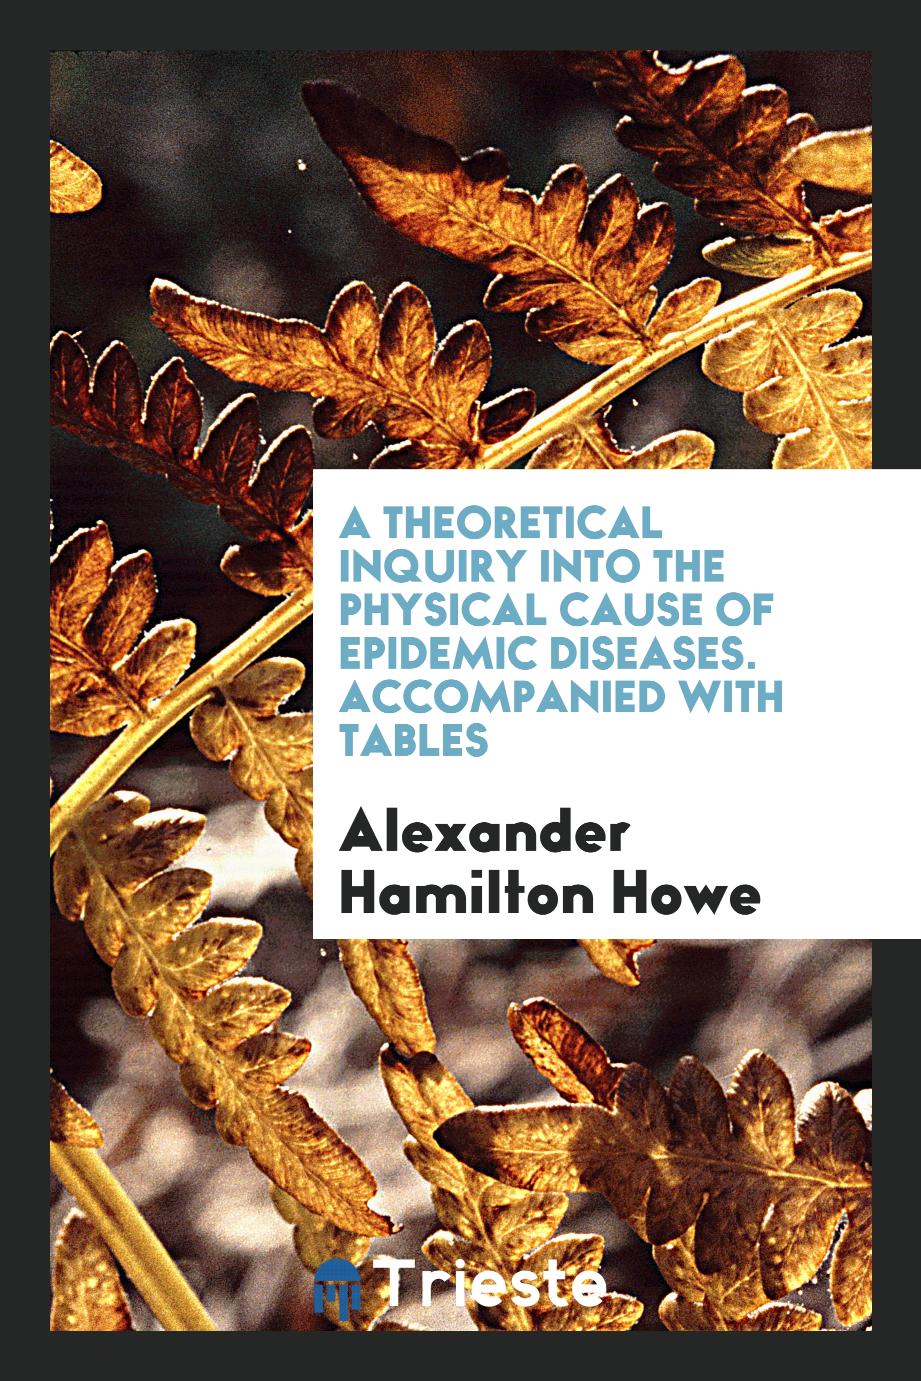 A Theoretical Inquiry into the Physical Cause of Epidemic Diseases. Accompanied with Tables